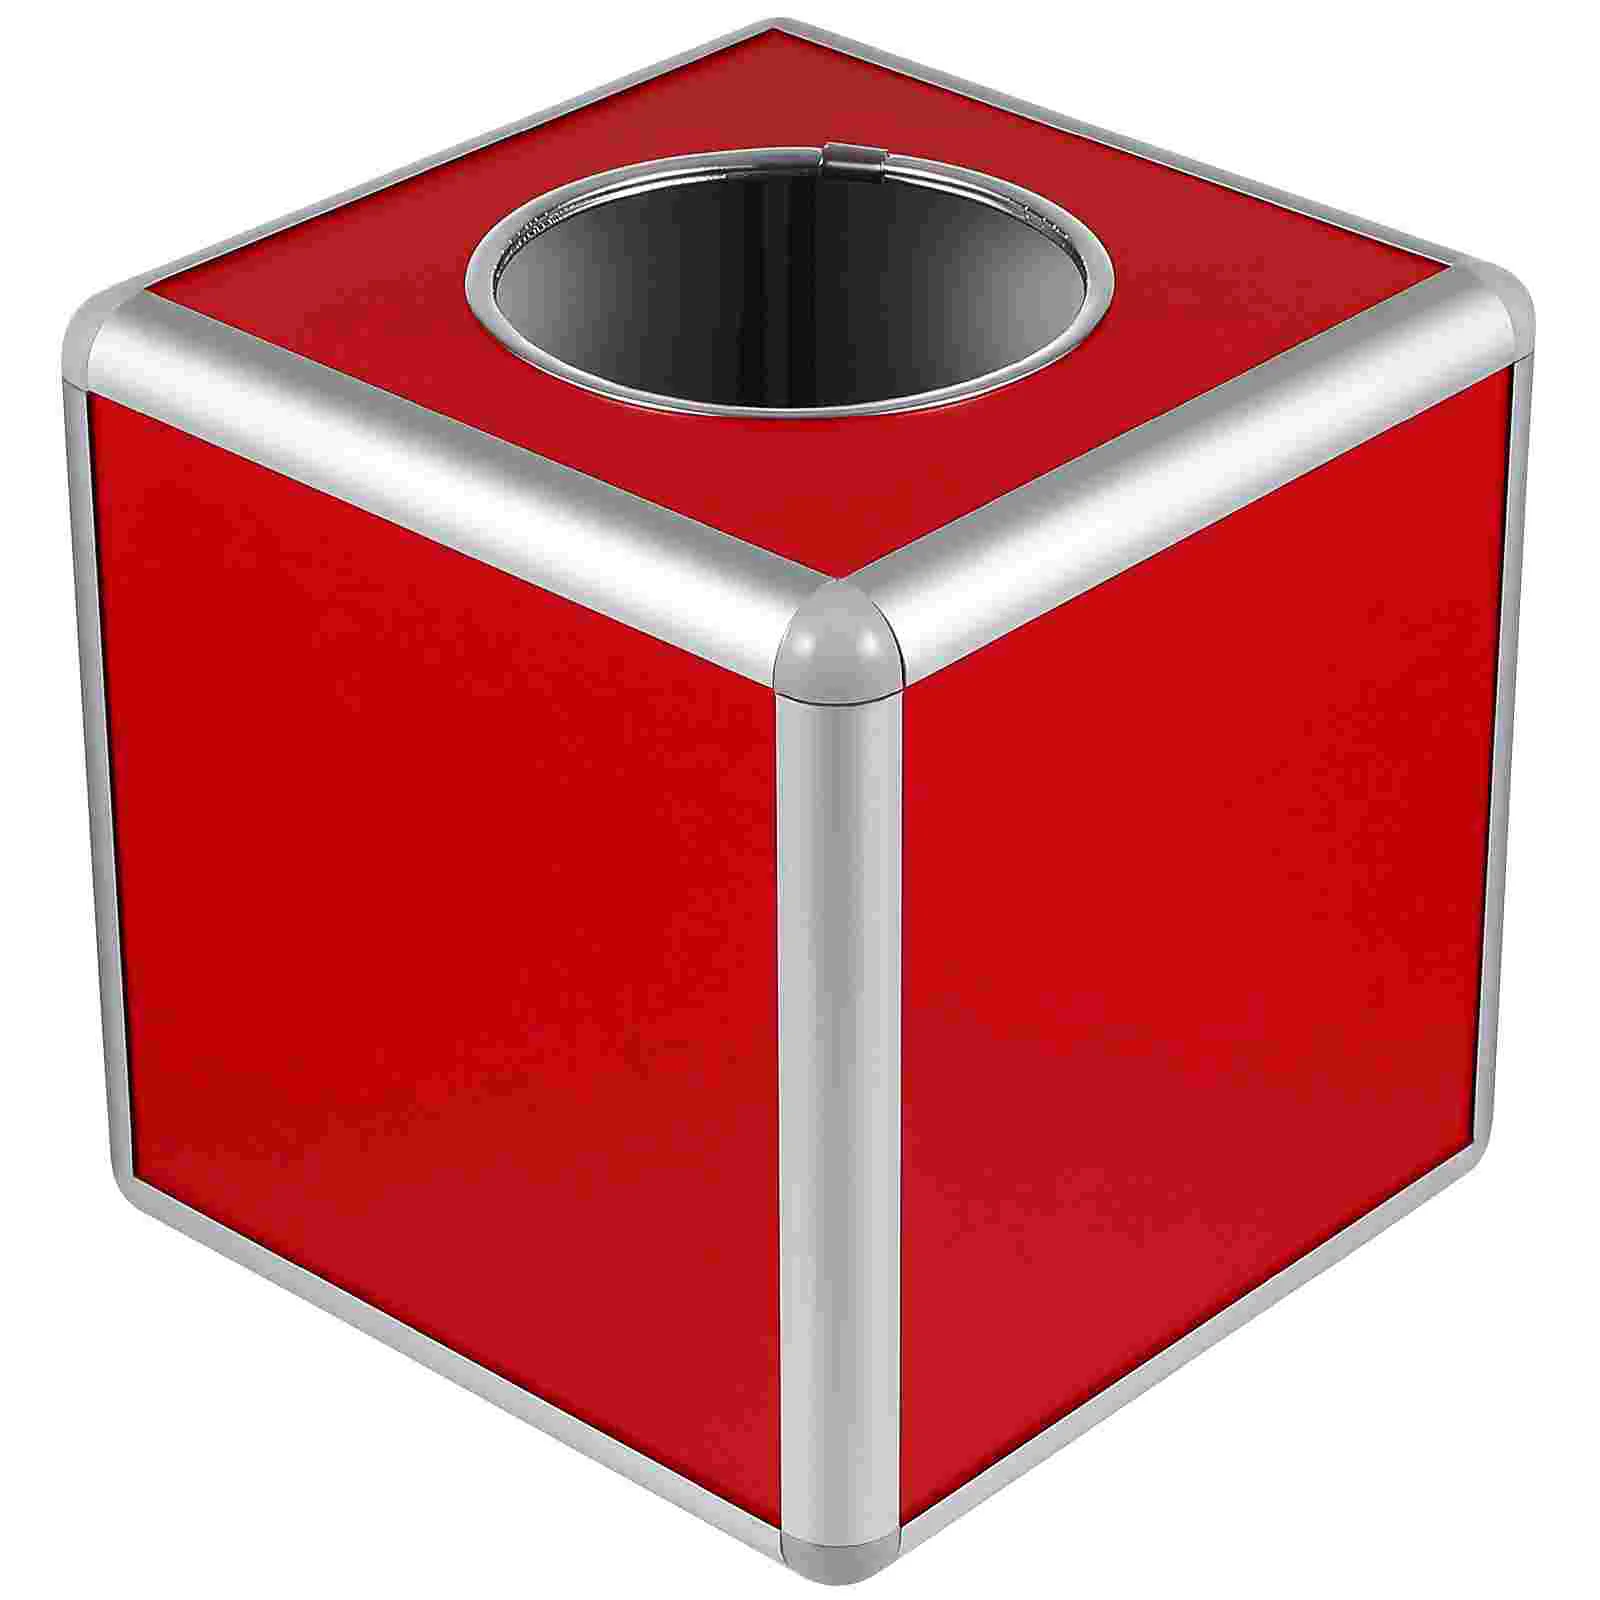 

Box Raffle Ticket Lottery Ballot Boxes Square Tickets Donation Large Fundraising Container Storage Slot Hole Draw Party Money